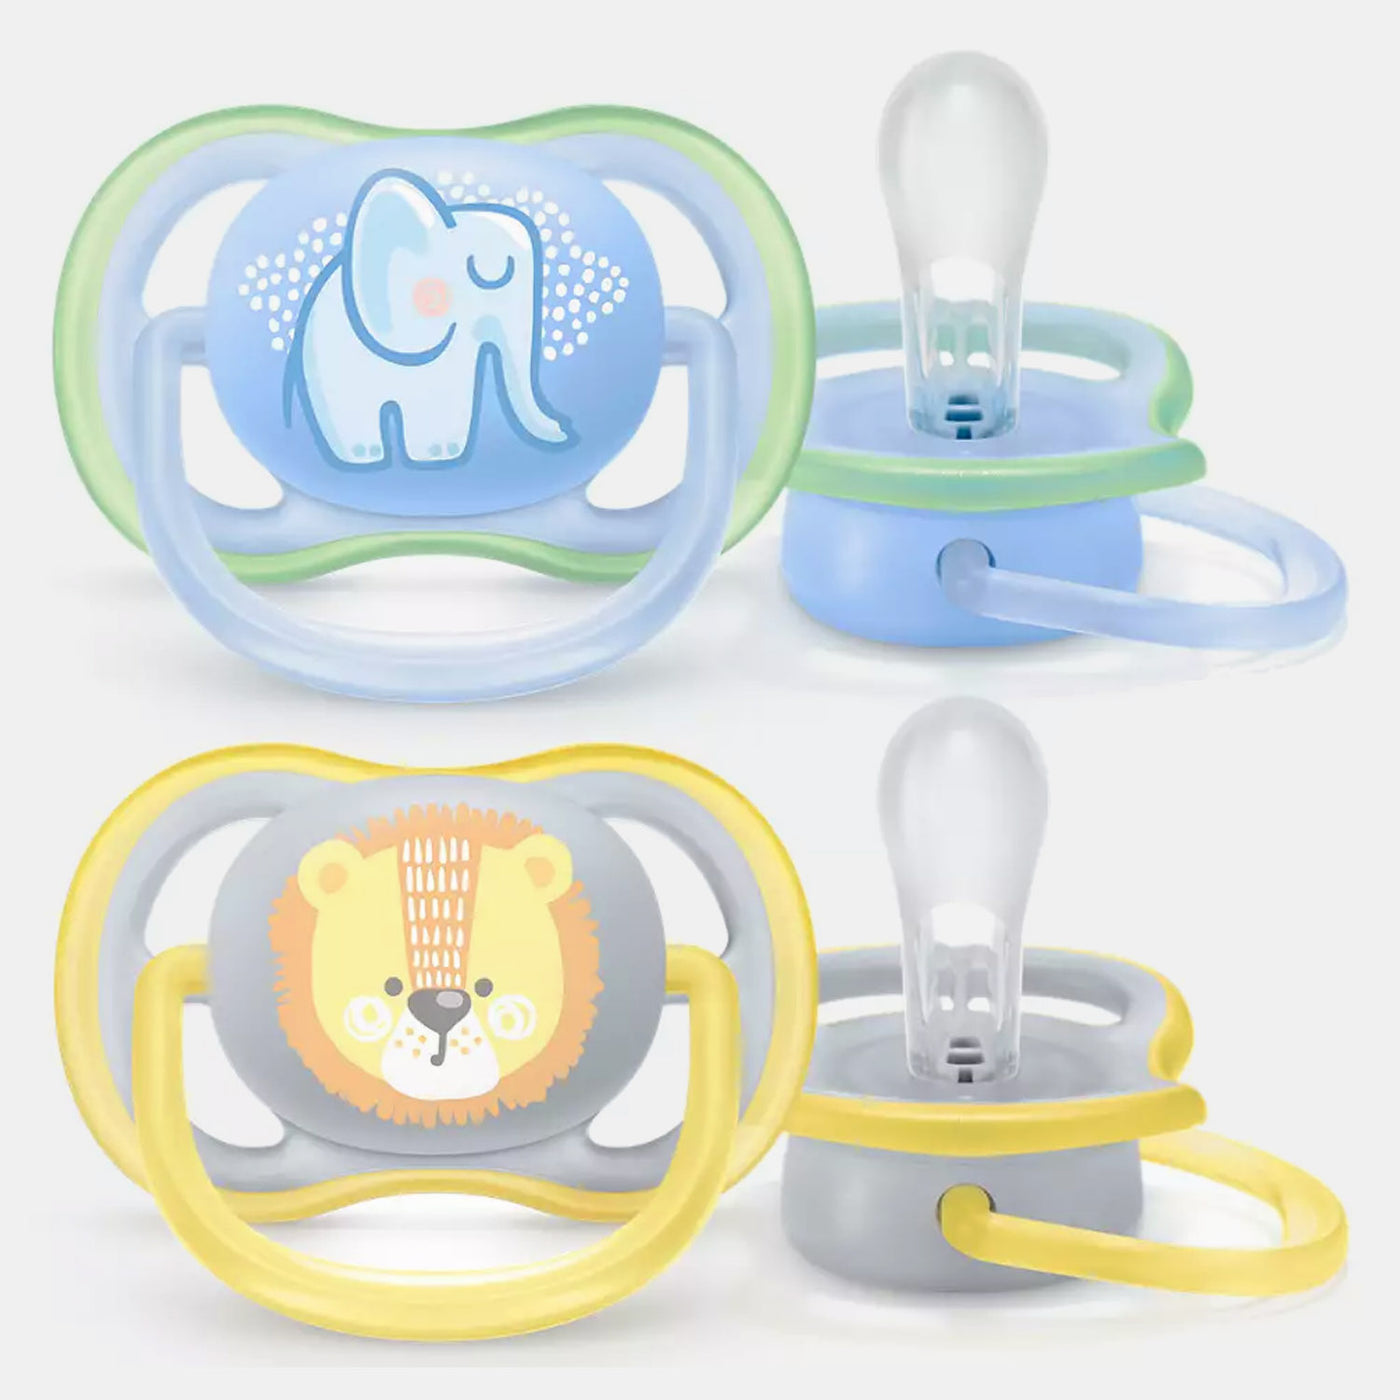 Philips Avent Ultra Air Pacifier SCF085/01